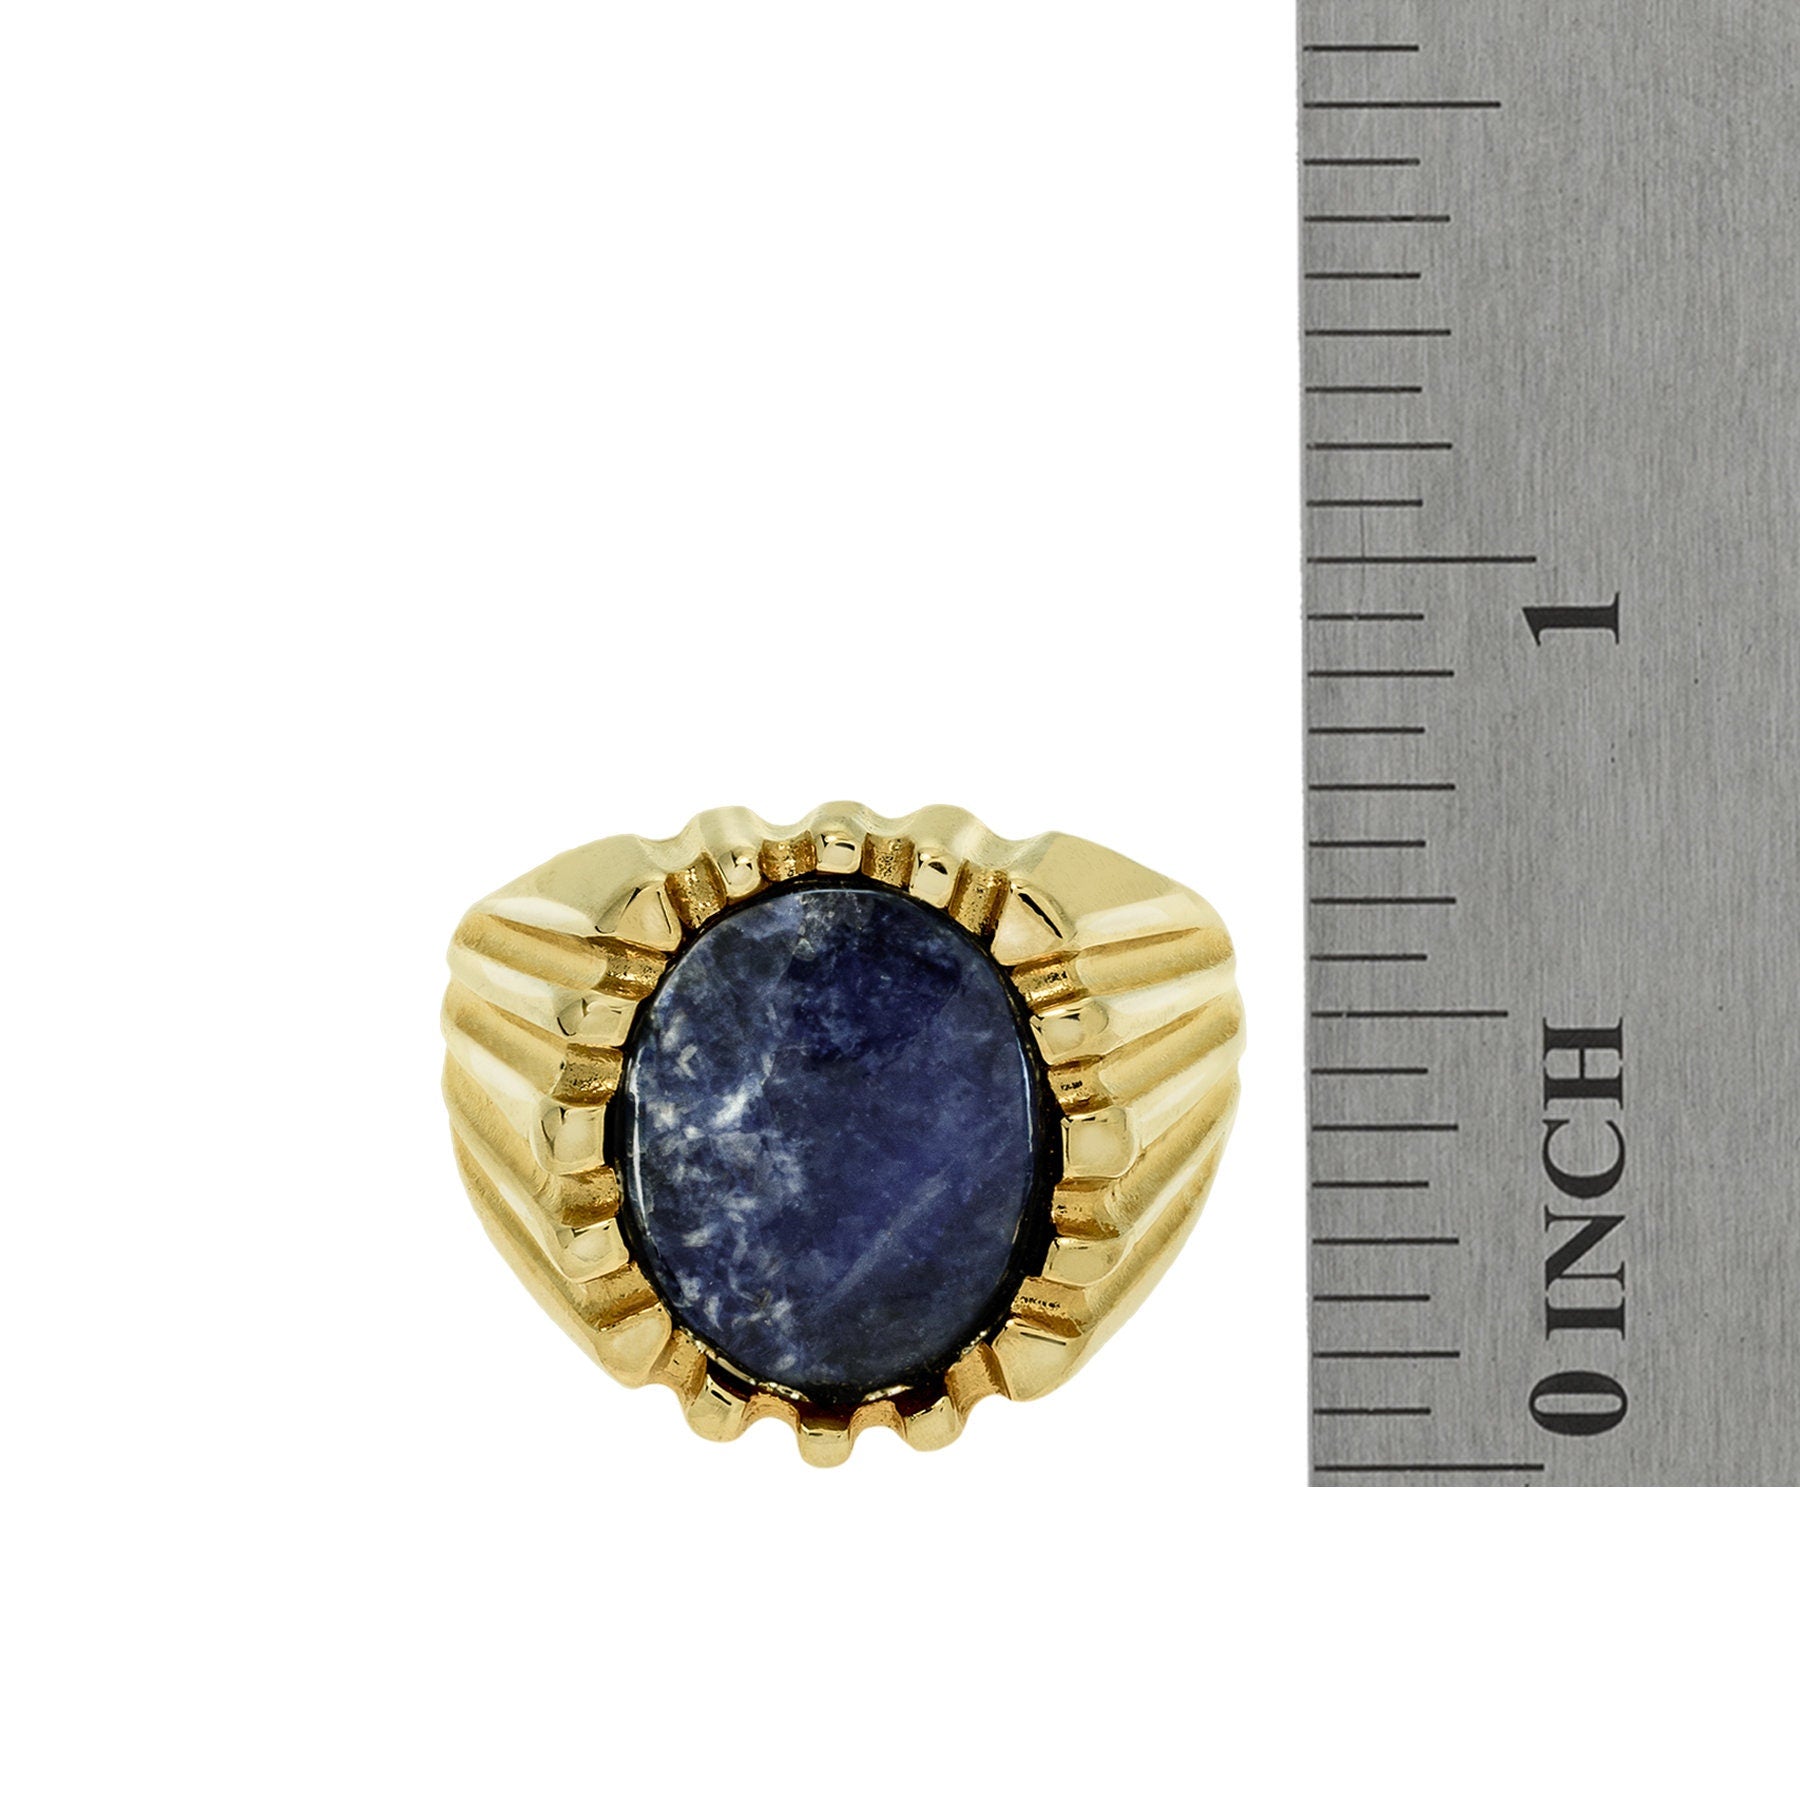 Vintage Ring 1980s Mens Genuine Sodalite 18kt Gold Plated Ring Unisex Jewelry #R1960 - Limited Stock - Never Worn